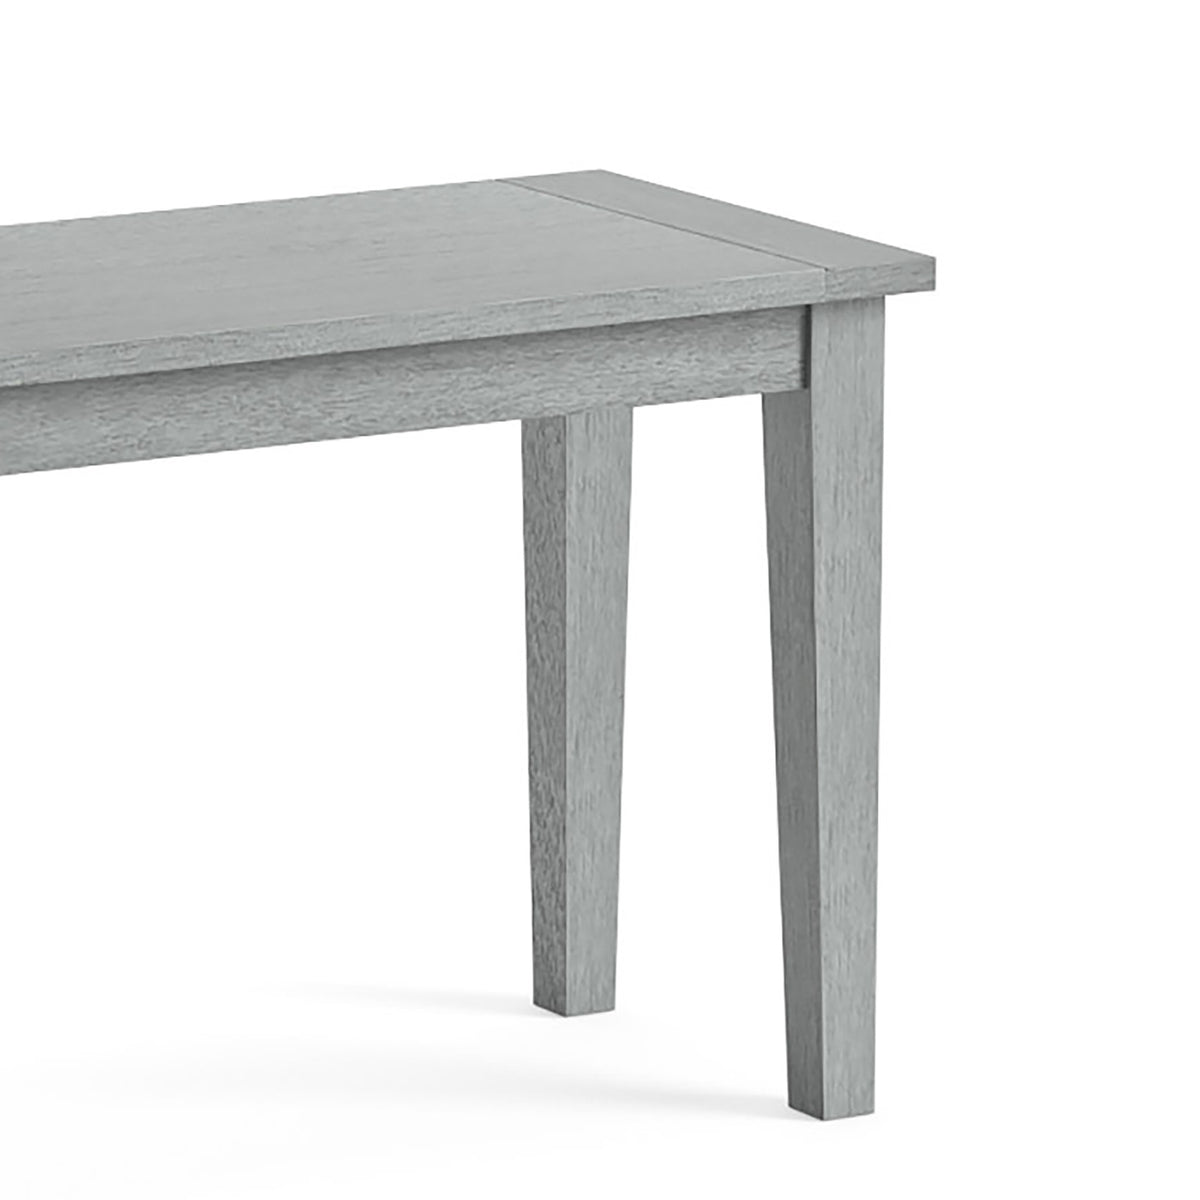 Elise Gris Grey Acacia 120cm Dining Bench close up of wooden legs